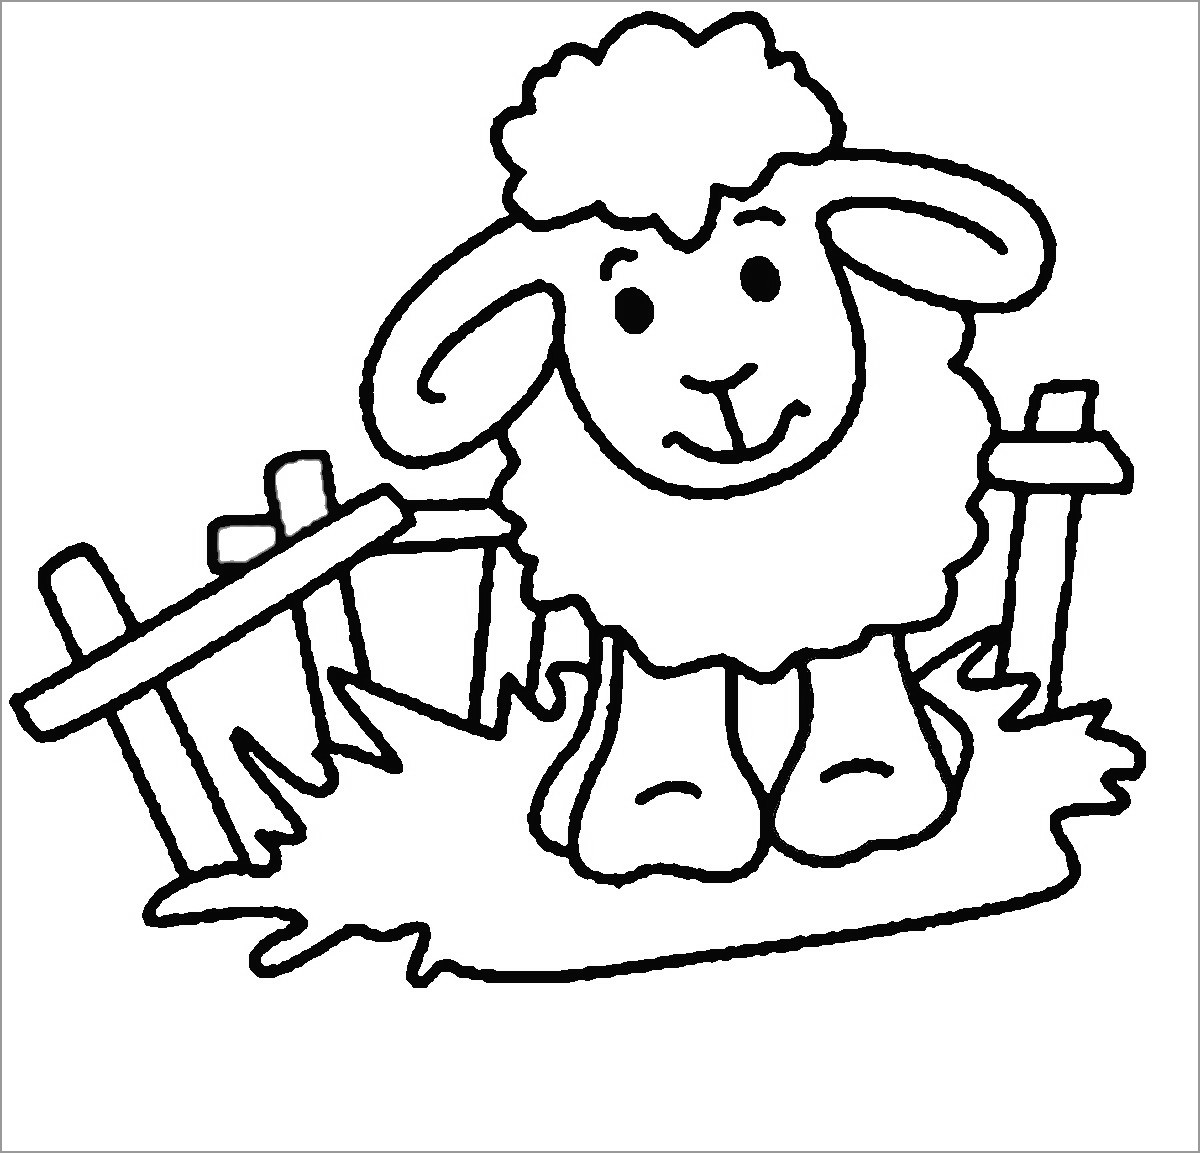 Sheep Coloring Page for Preschoolers   ColoringBay